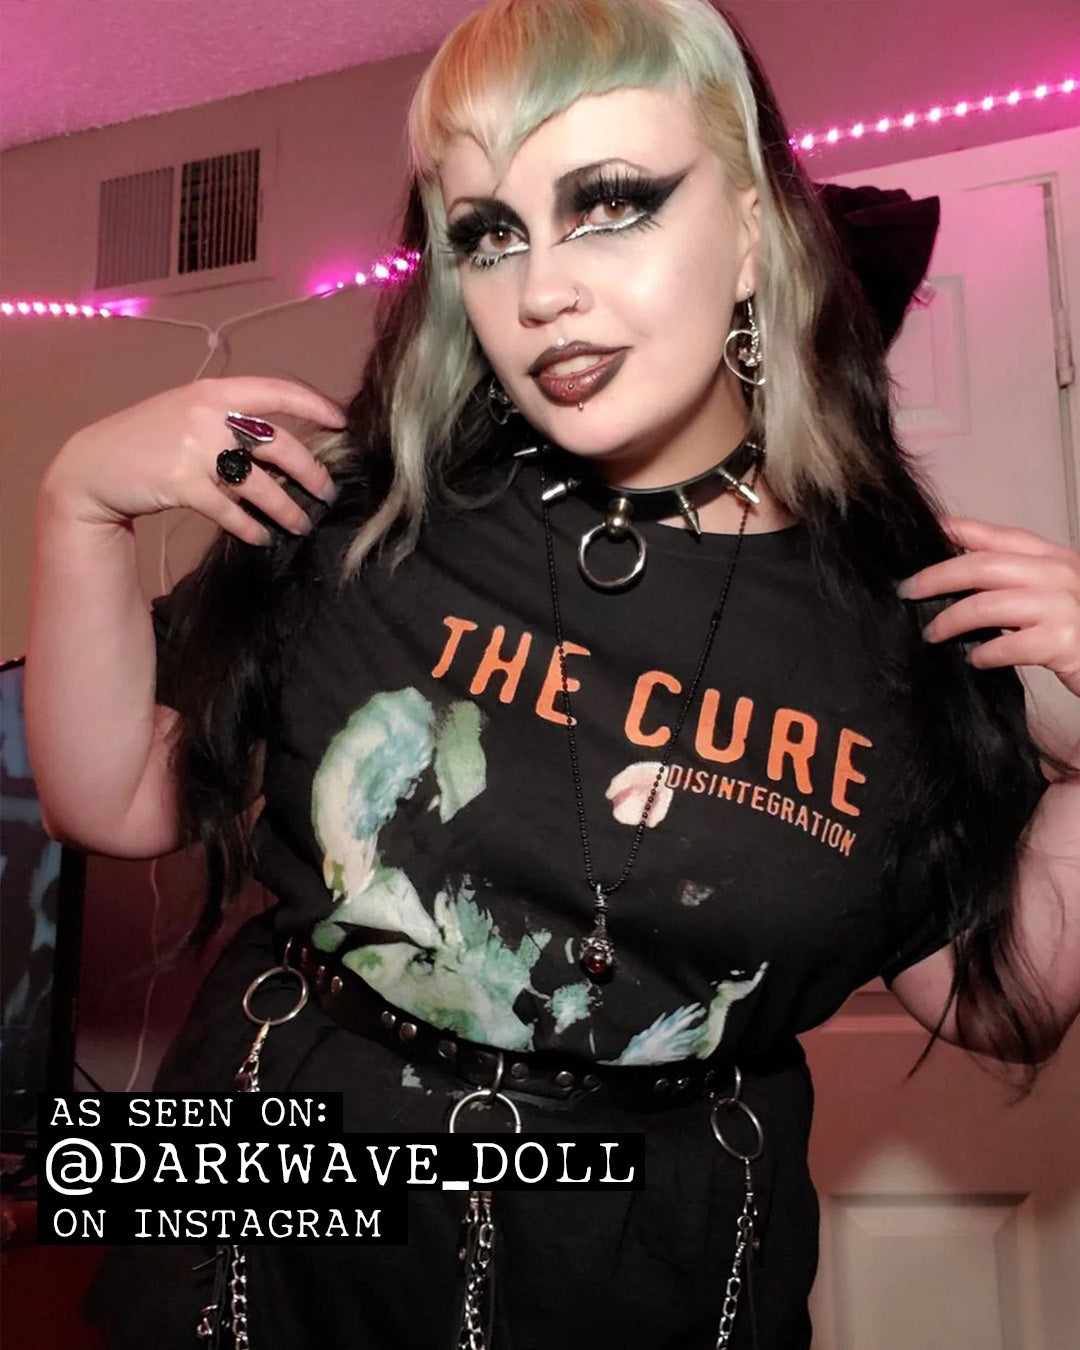 The Cure Disintegration Tee